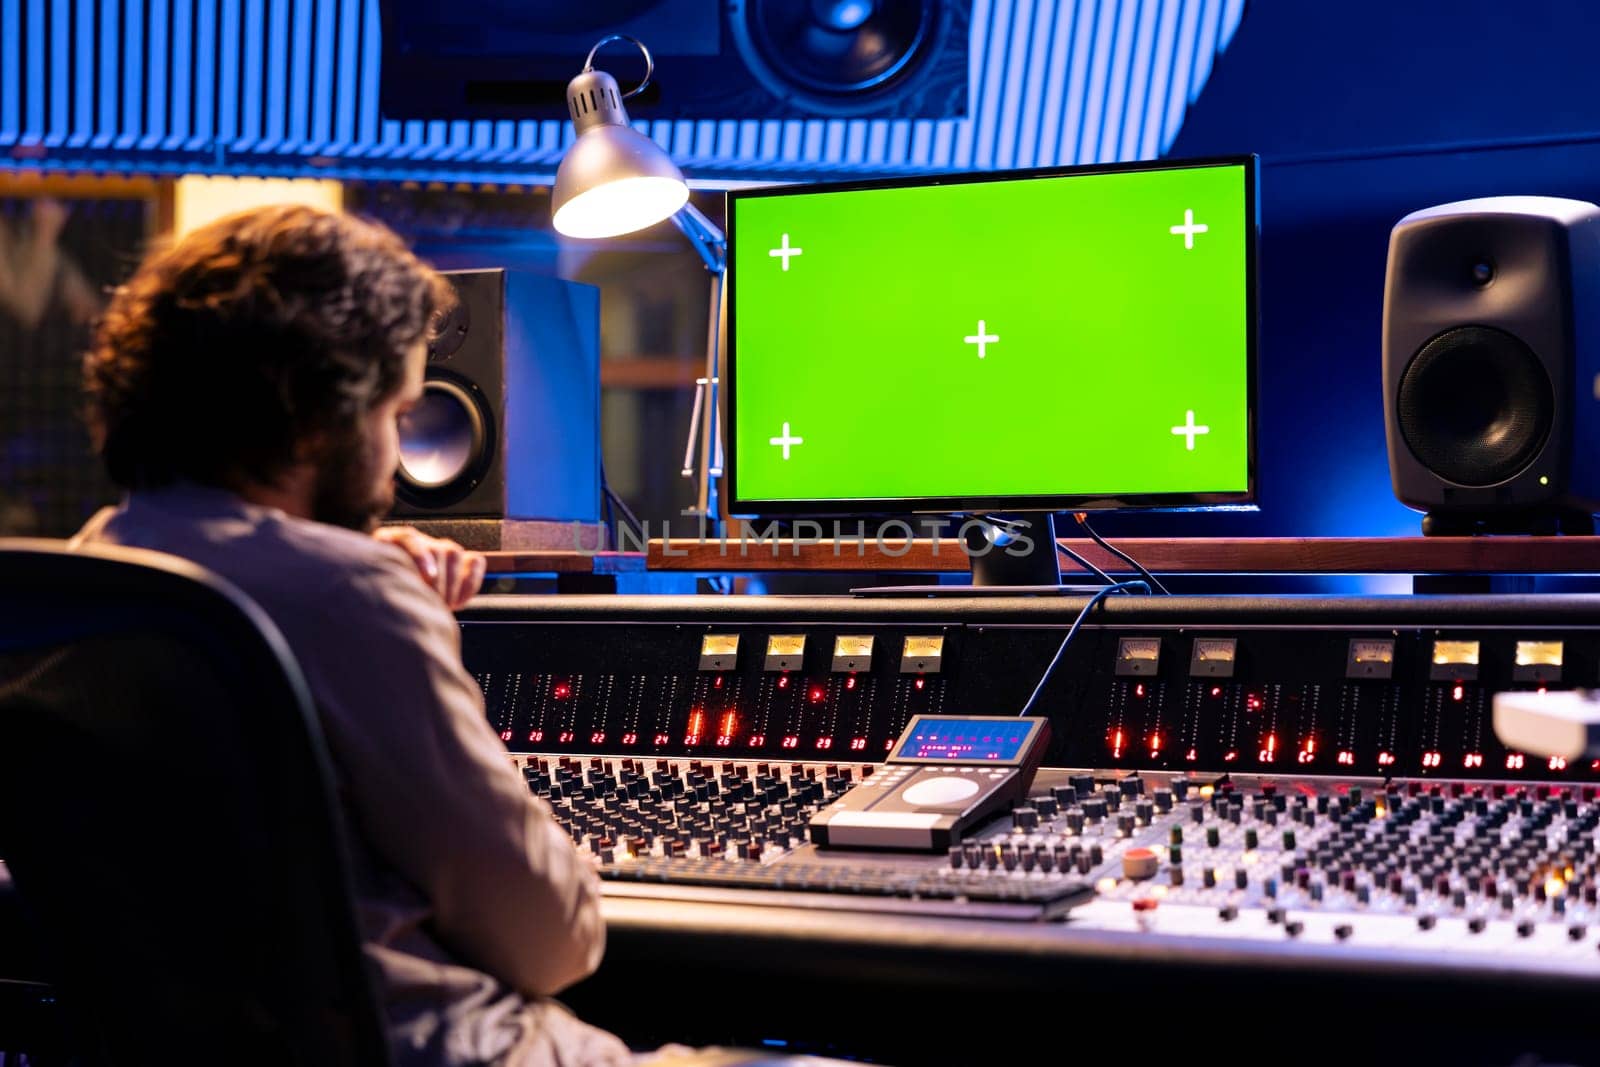 Sound engineer working with isolated display in studio control room by DCStudio